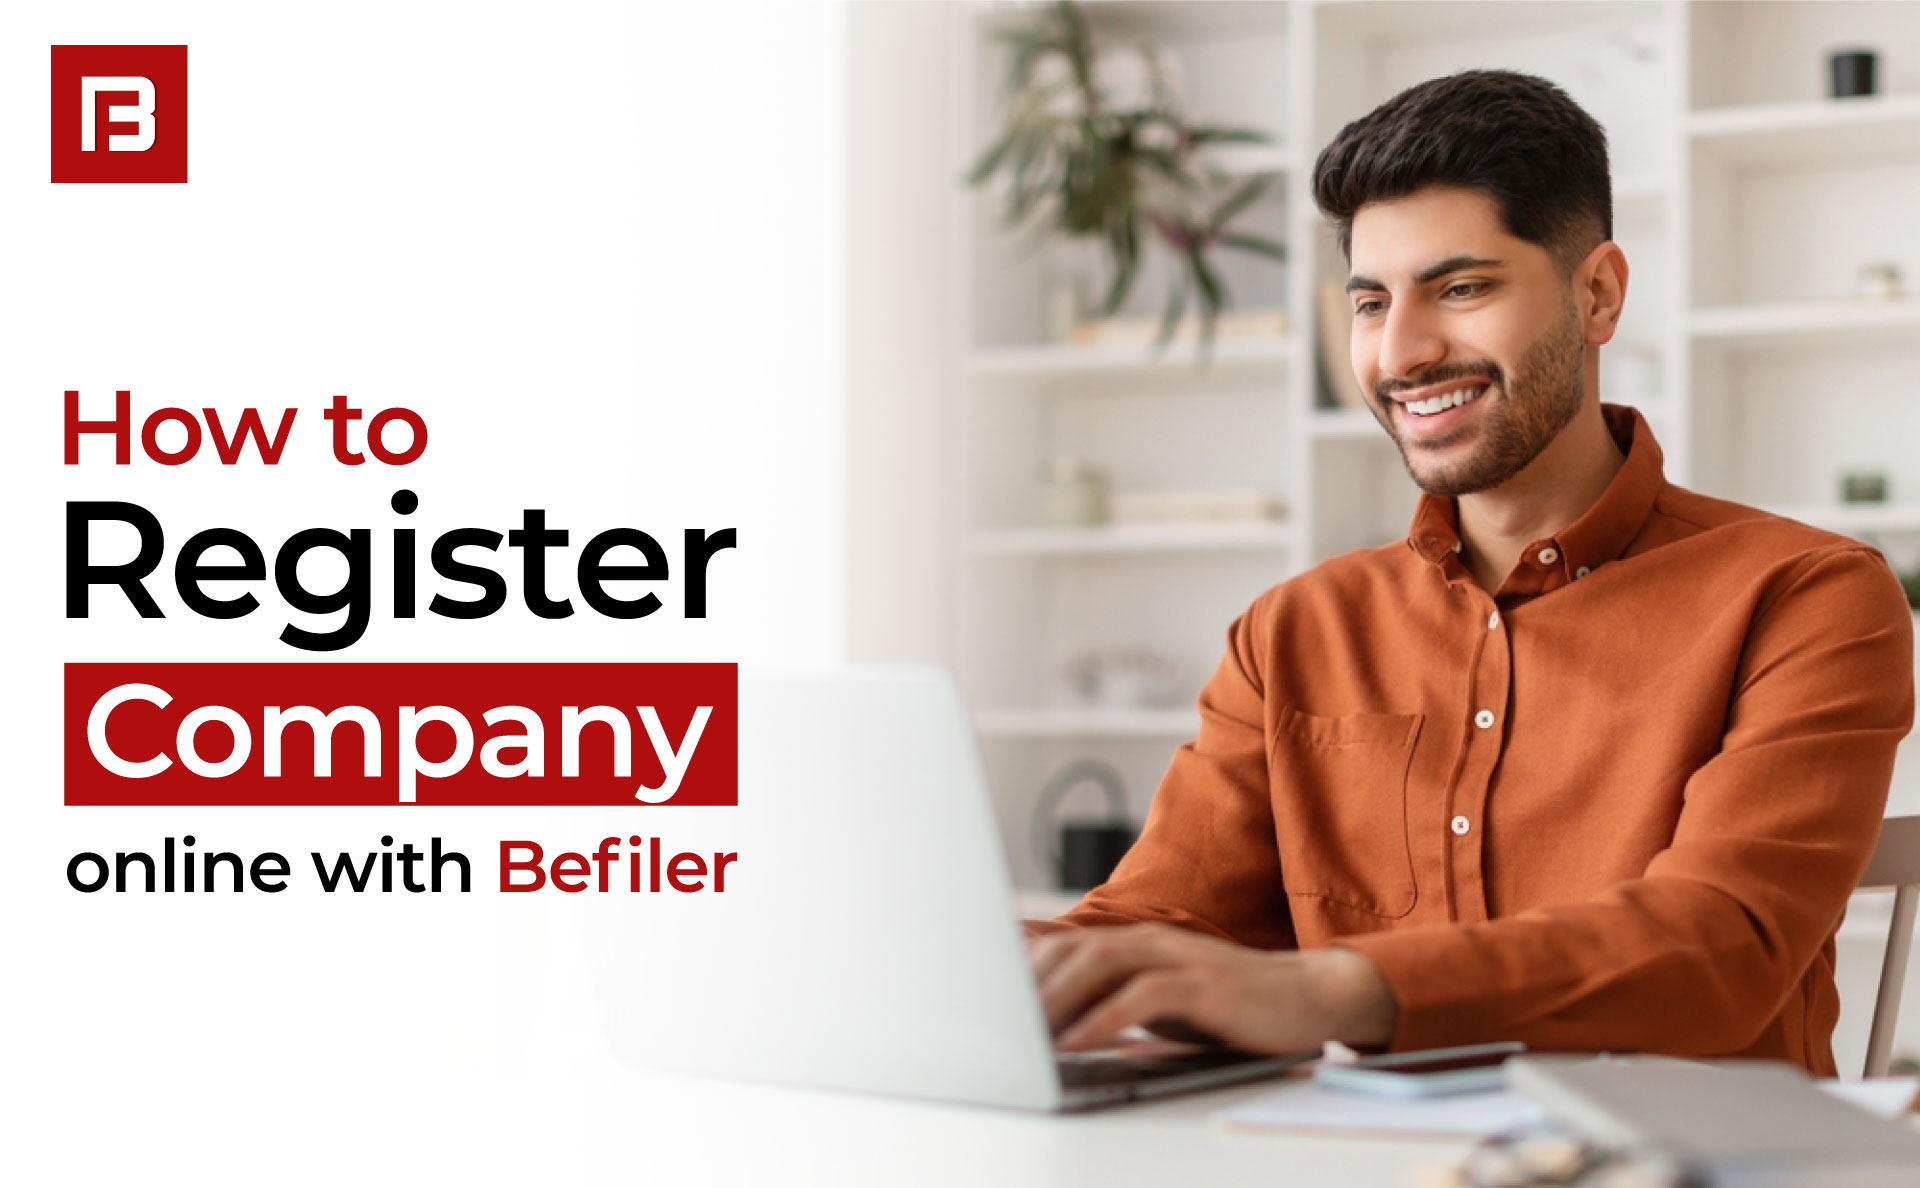 How to register your company online with Befiler